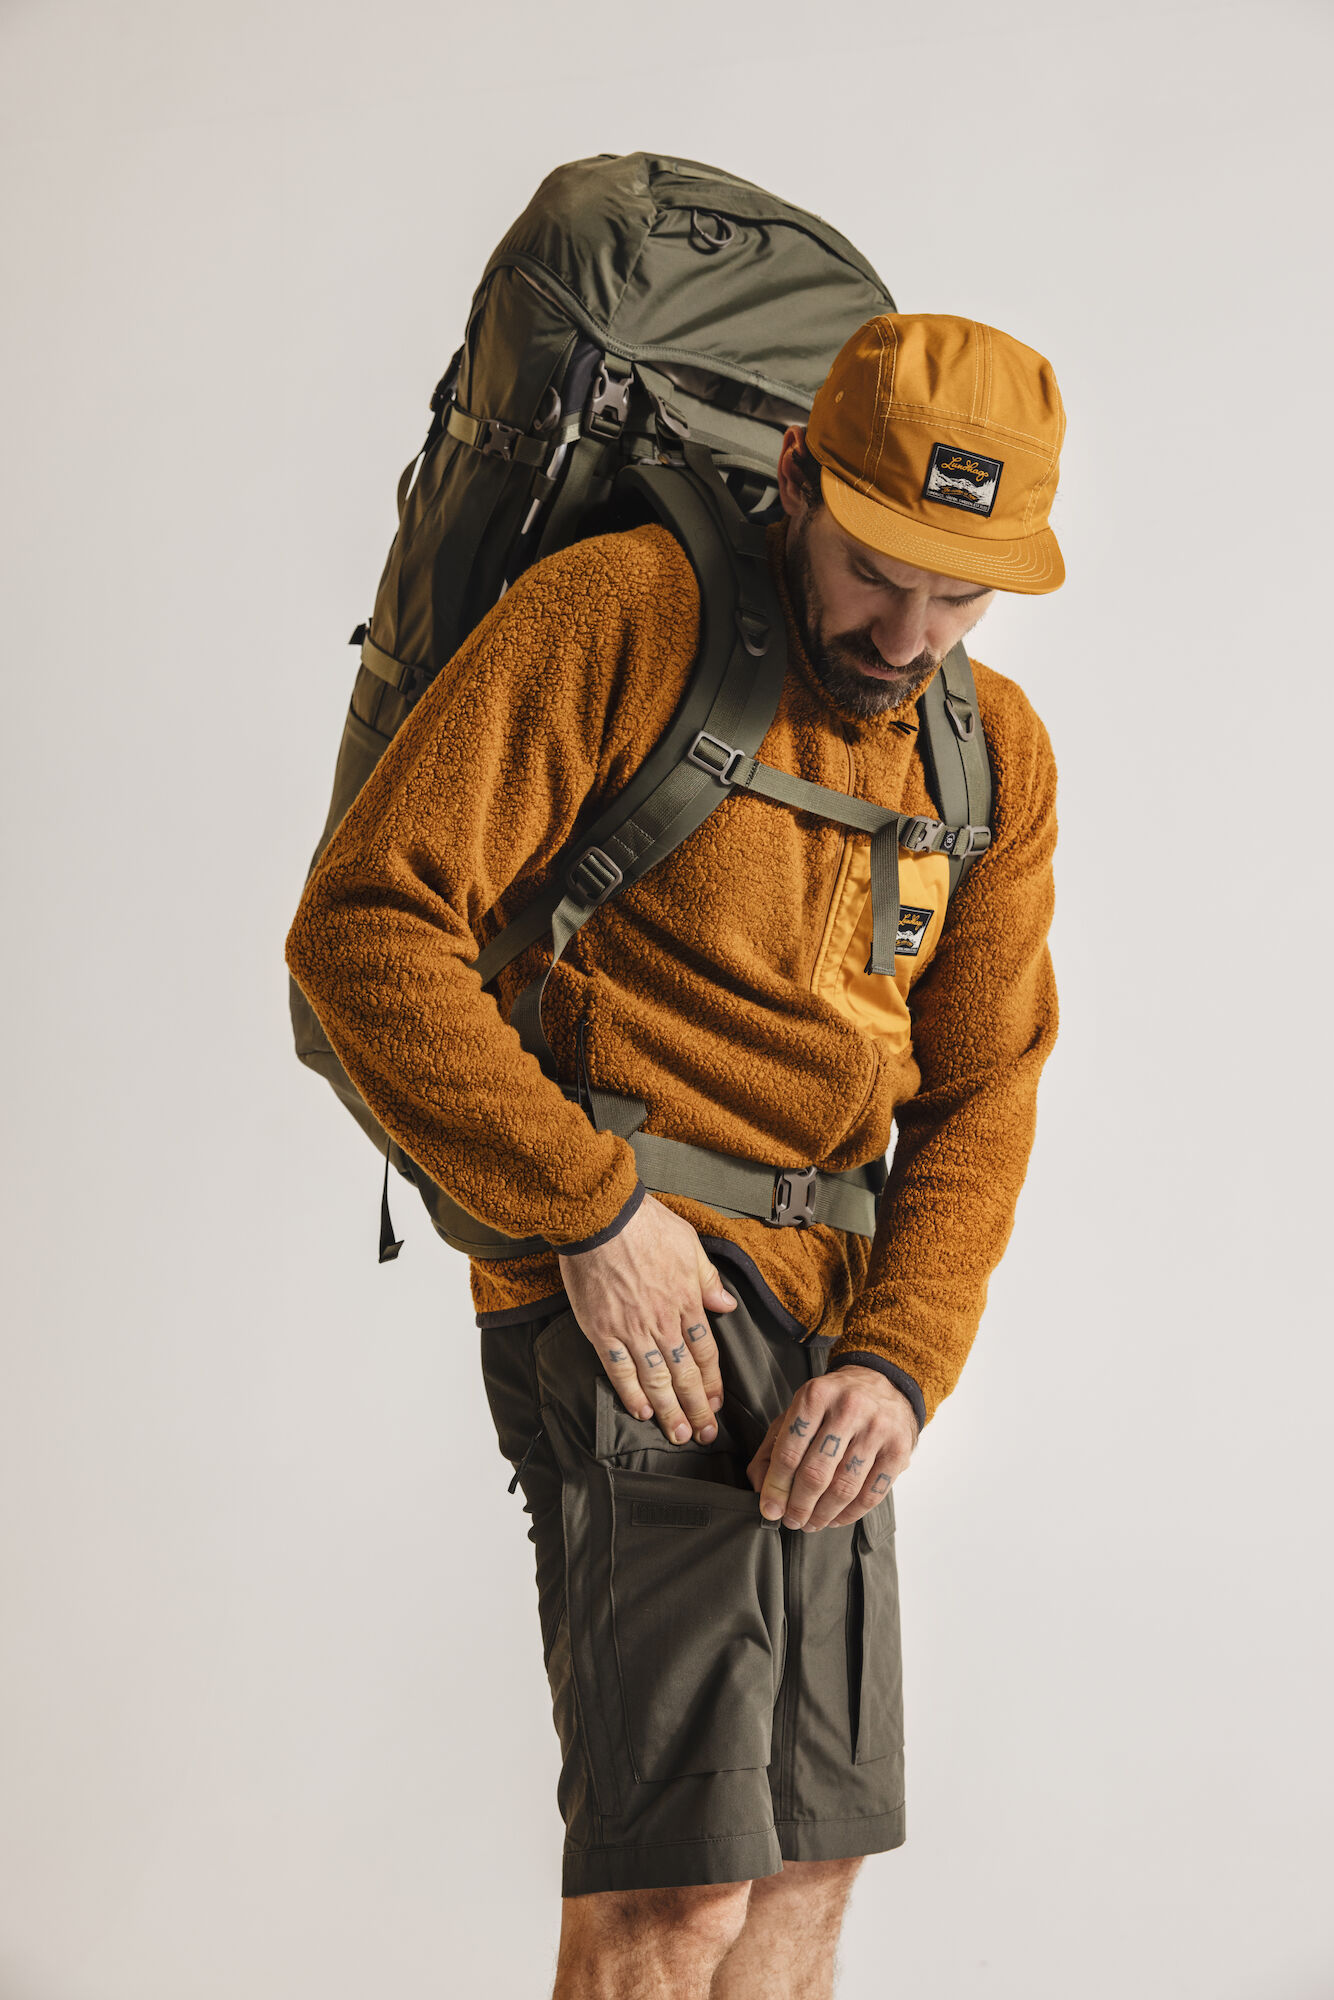 A man wearing a backpack.